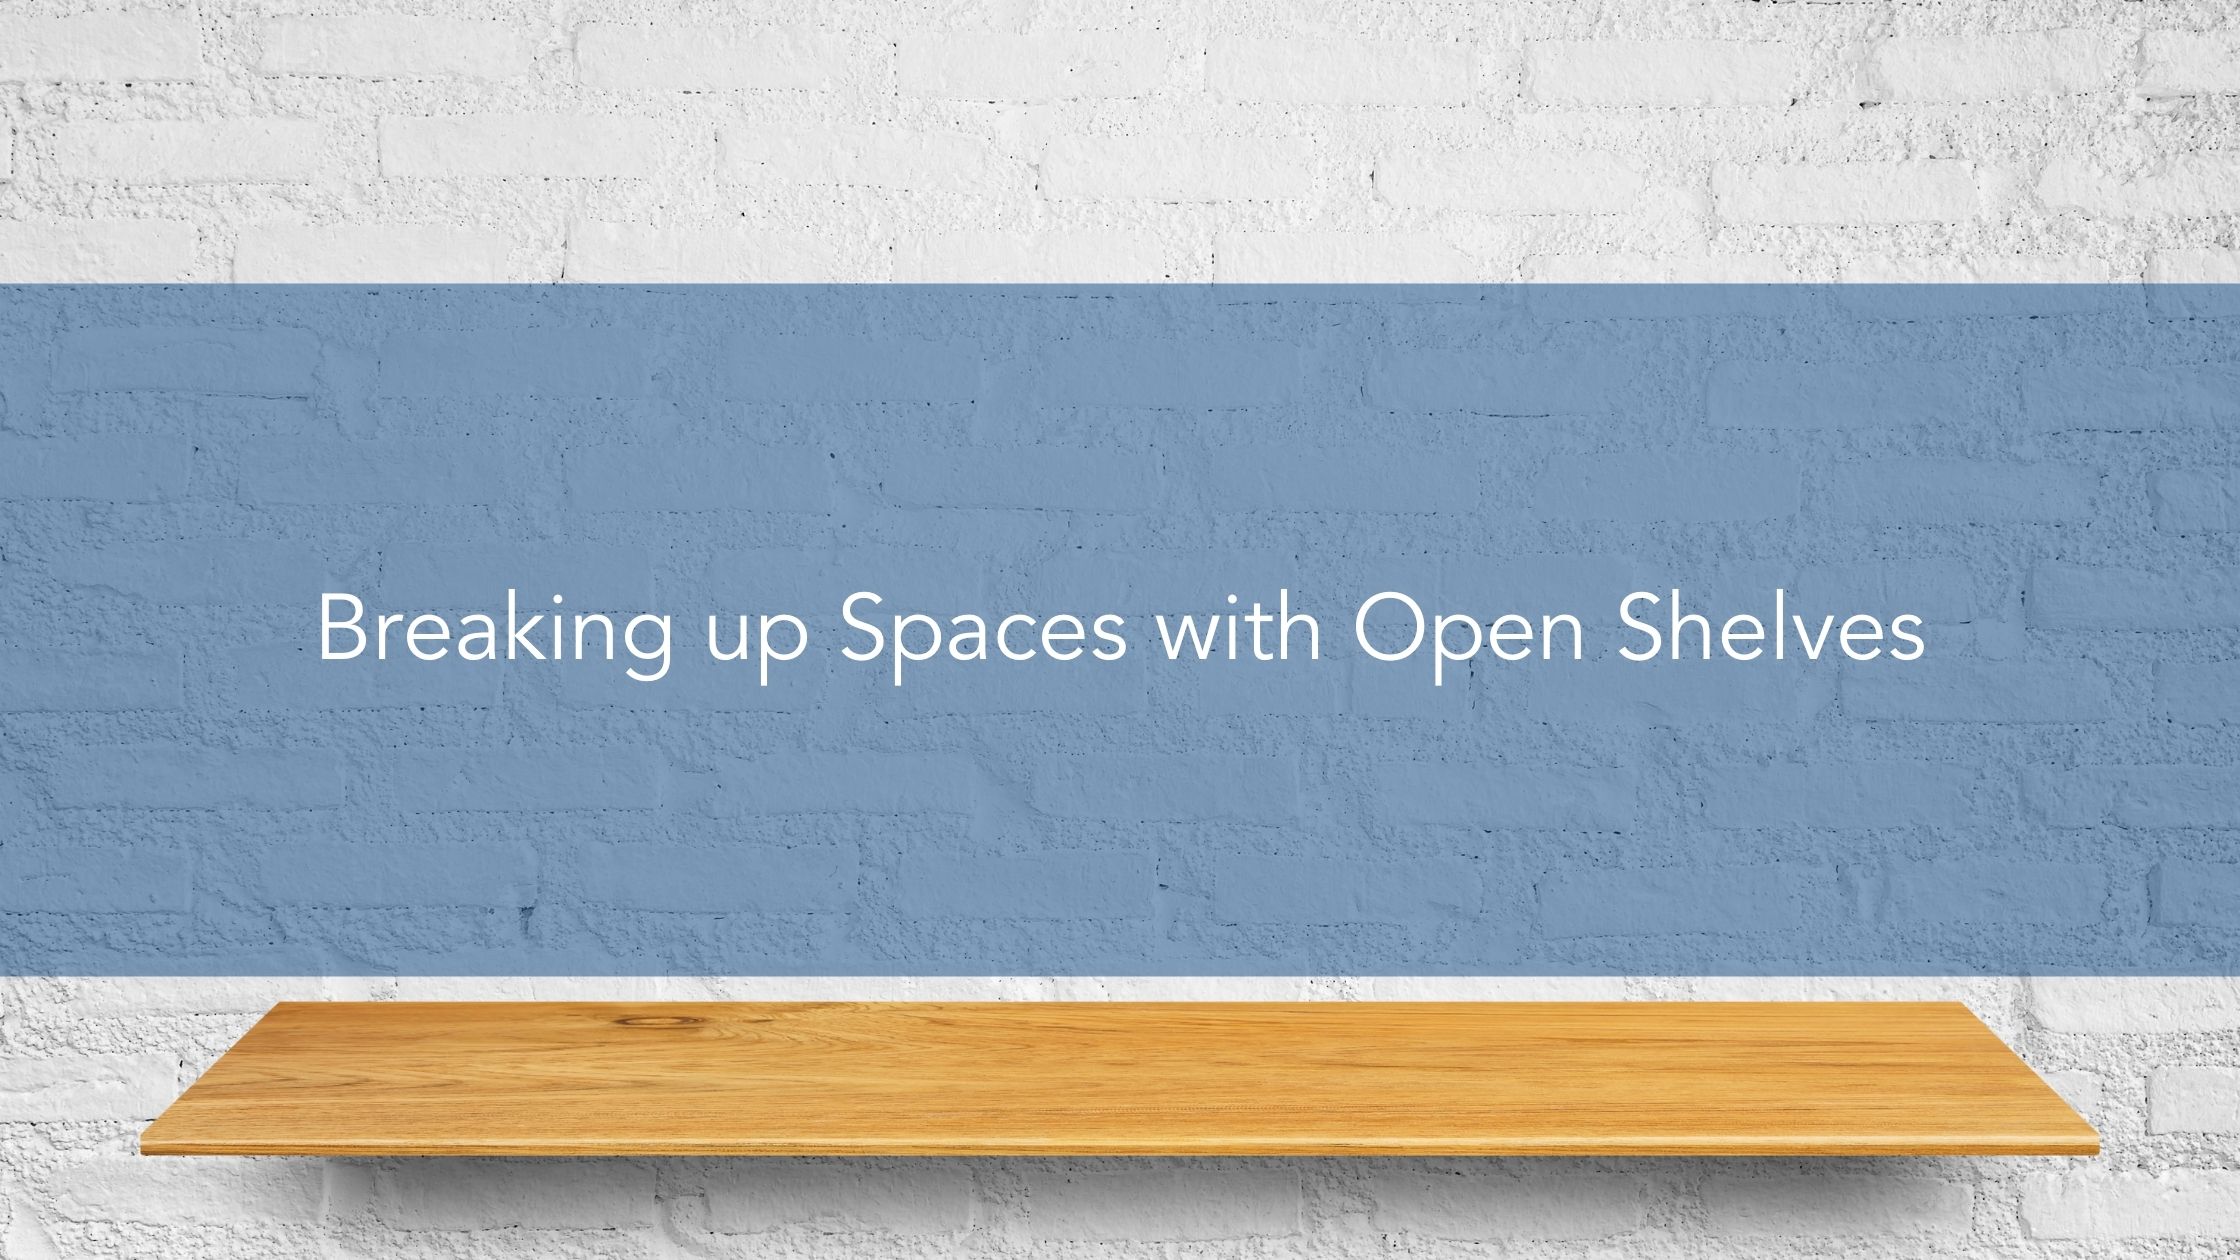 Breaking up Spaces with Open Shelves